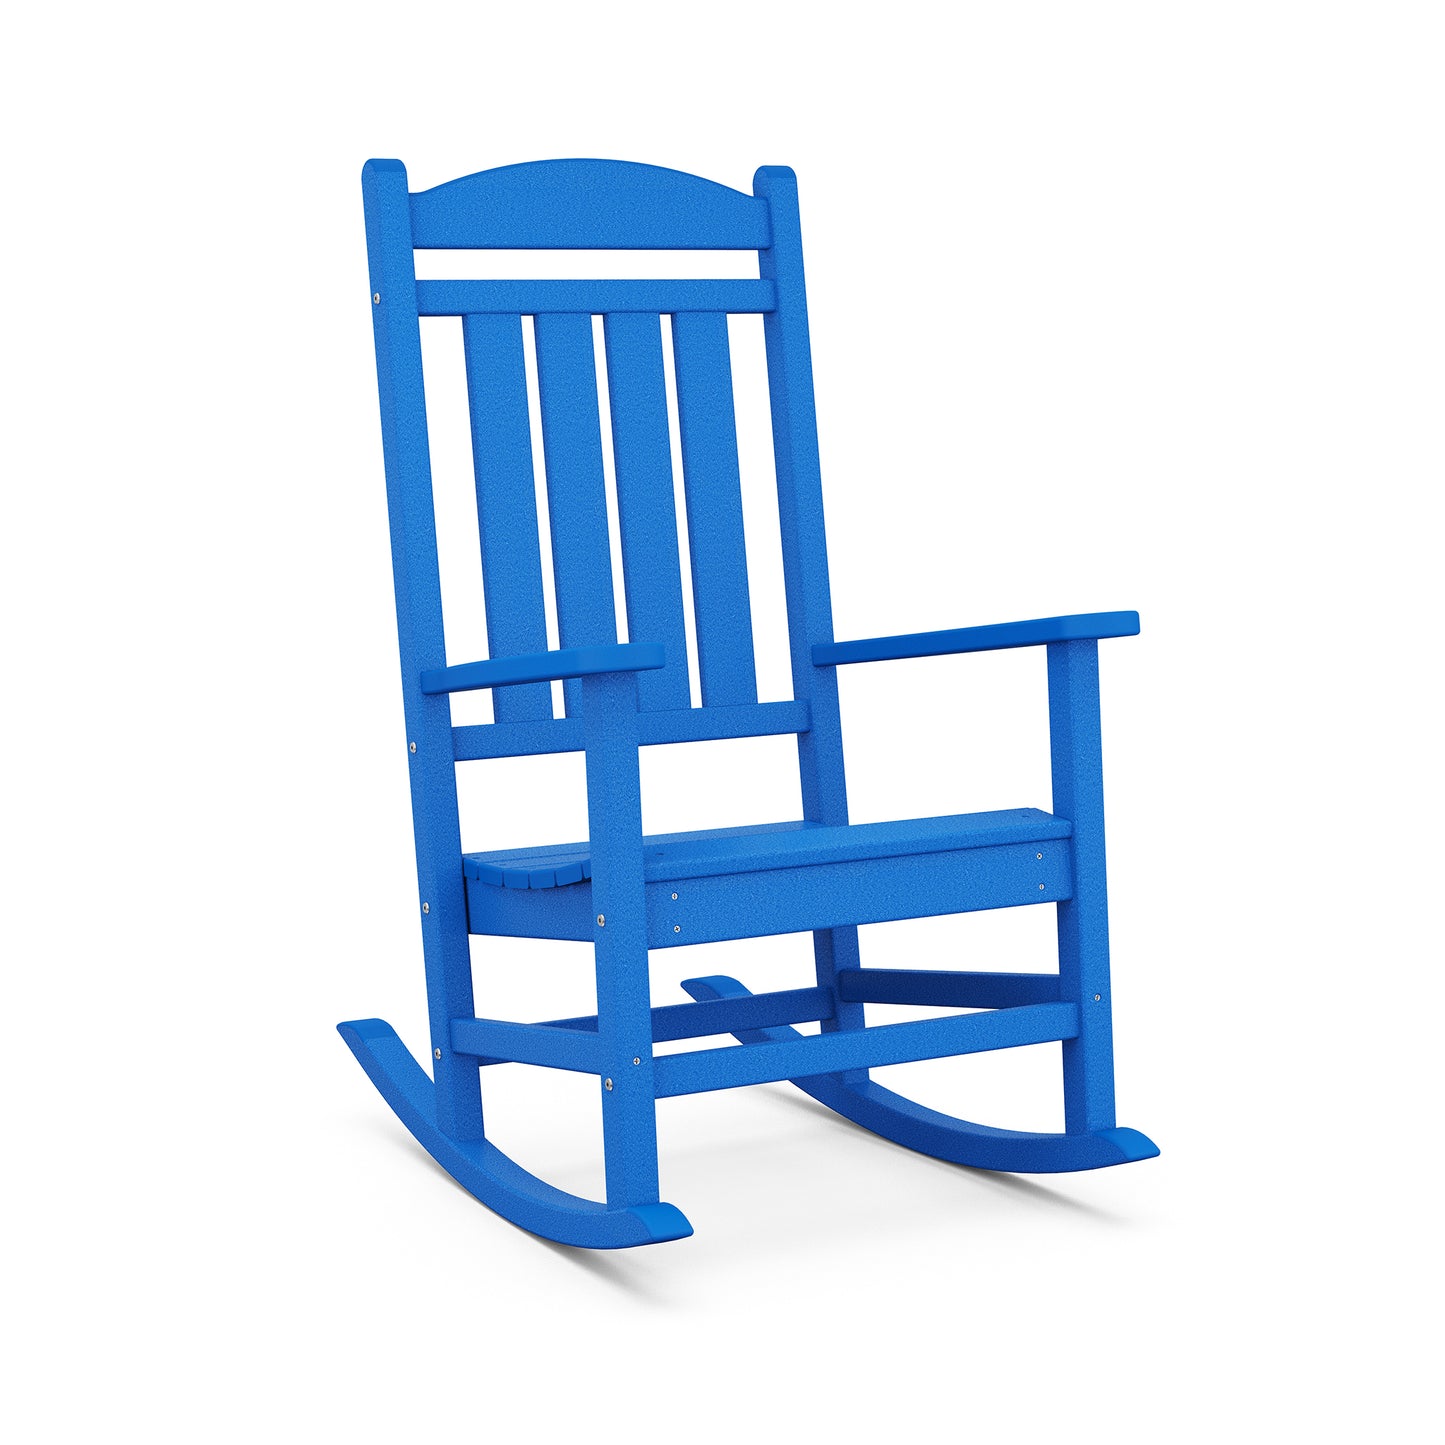 A bright blue POLYWOOD Presidential Outdoor Rocking Chair with a traditional design, featuring vertical slats and curved rockers, isolated on a white background.